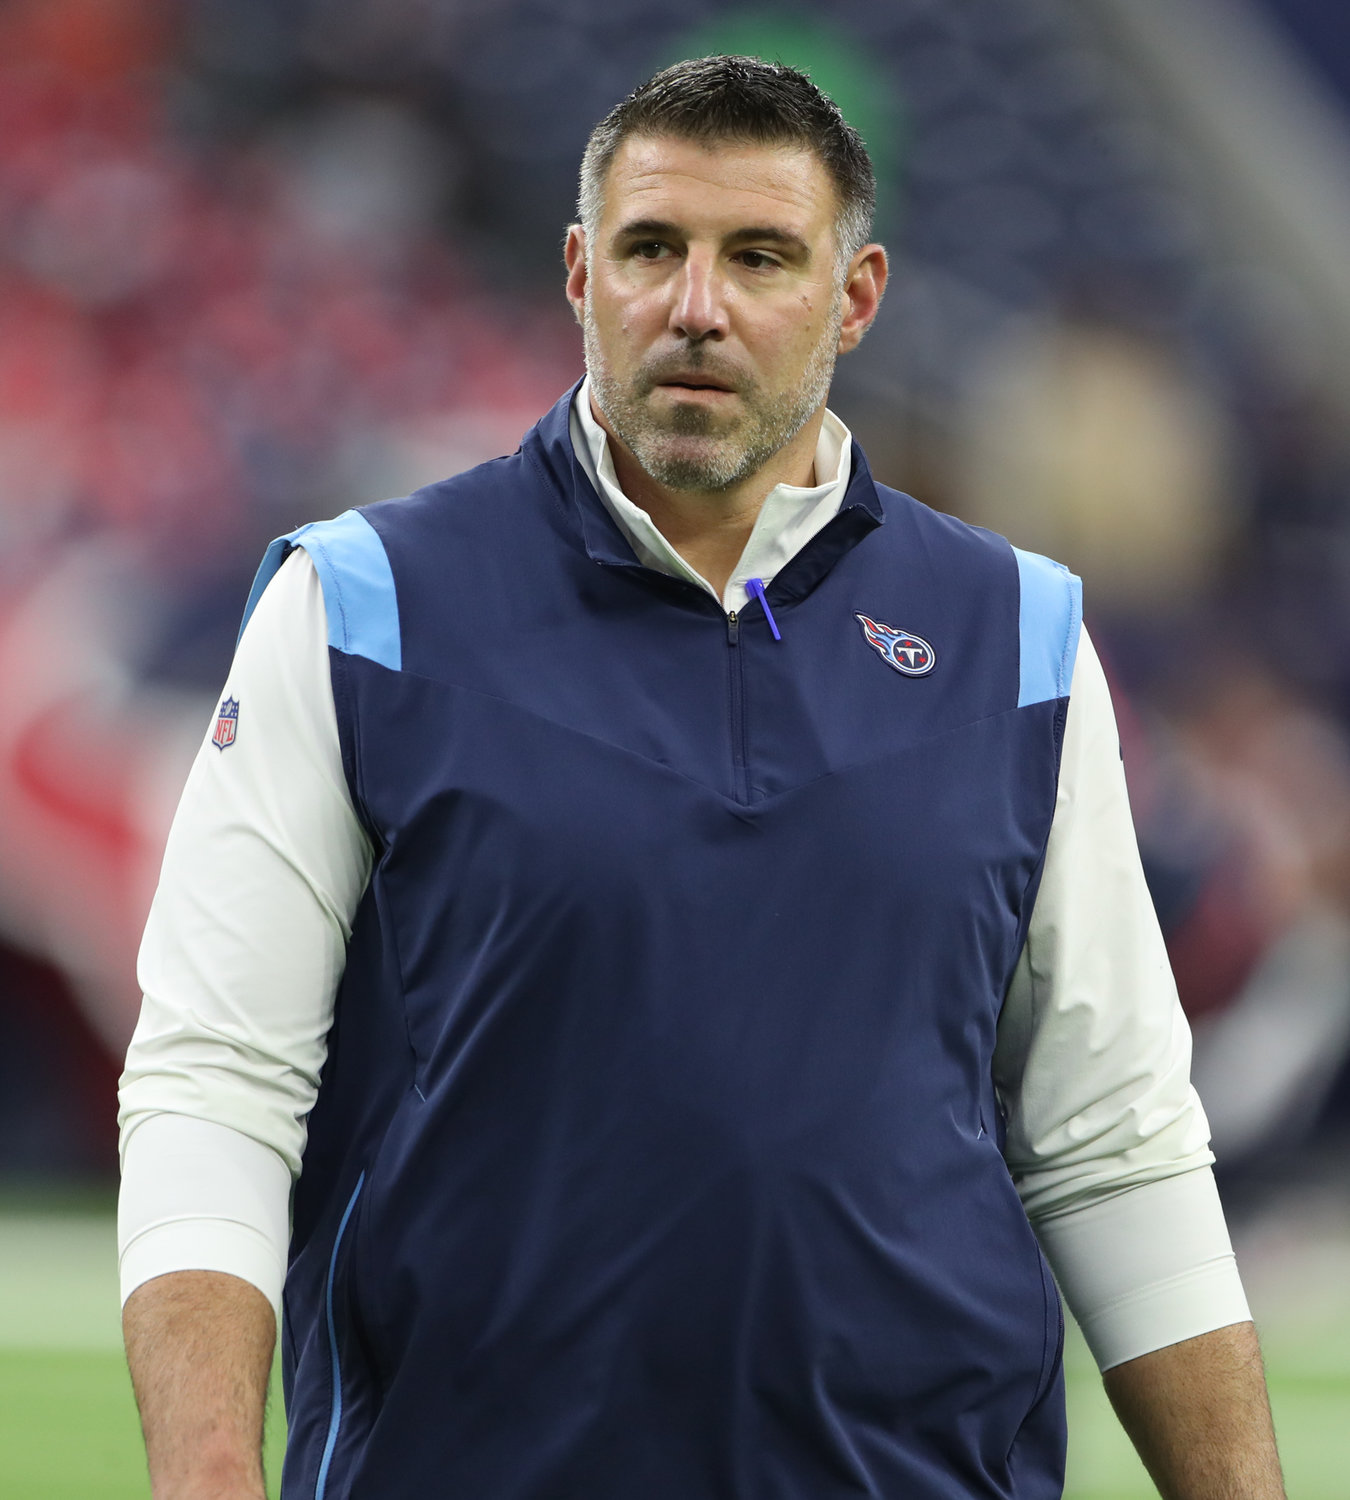 Tennessee Titans head coach Mike Vrabel before the start of an NFL game between the Texans and the Titans on Jan. 9, 2022 in Houston, Texas.